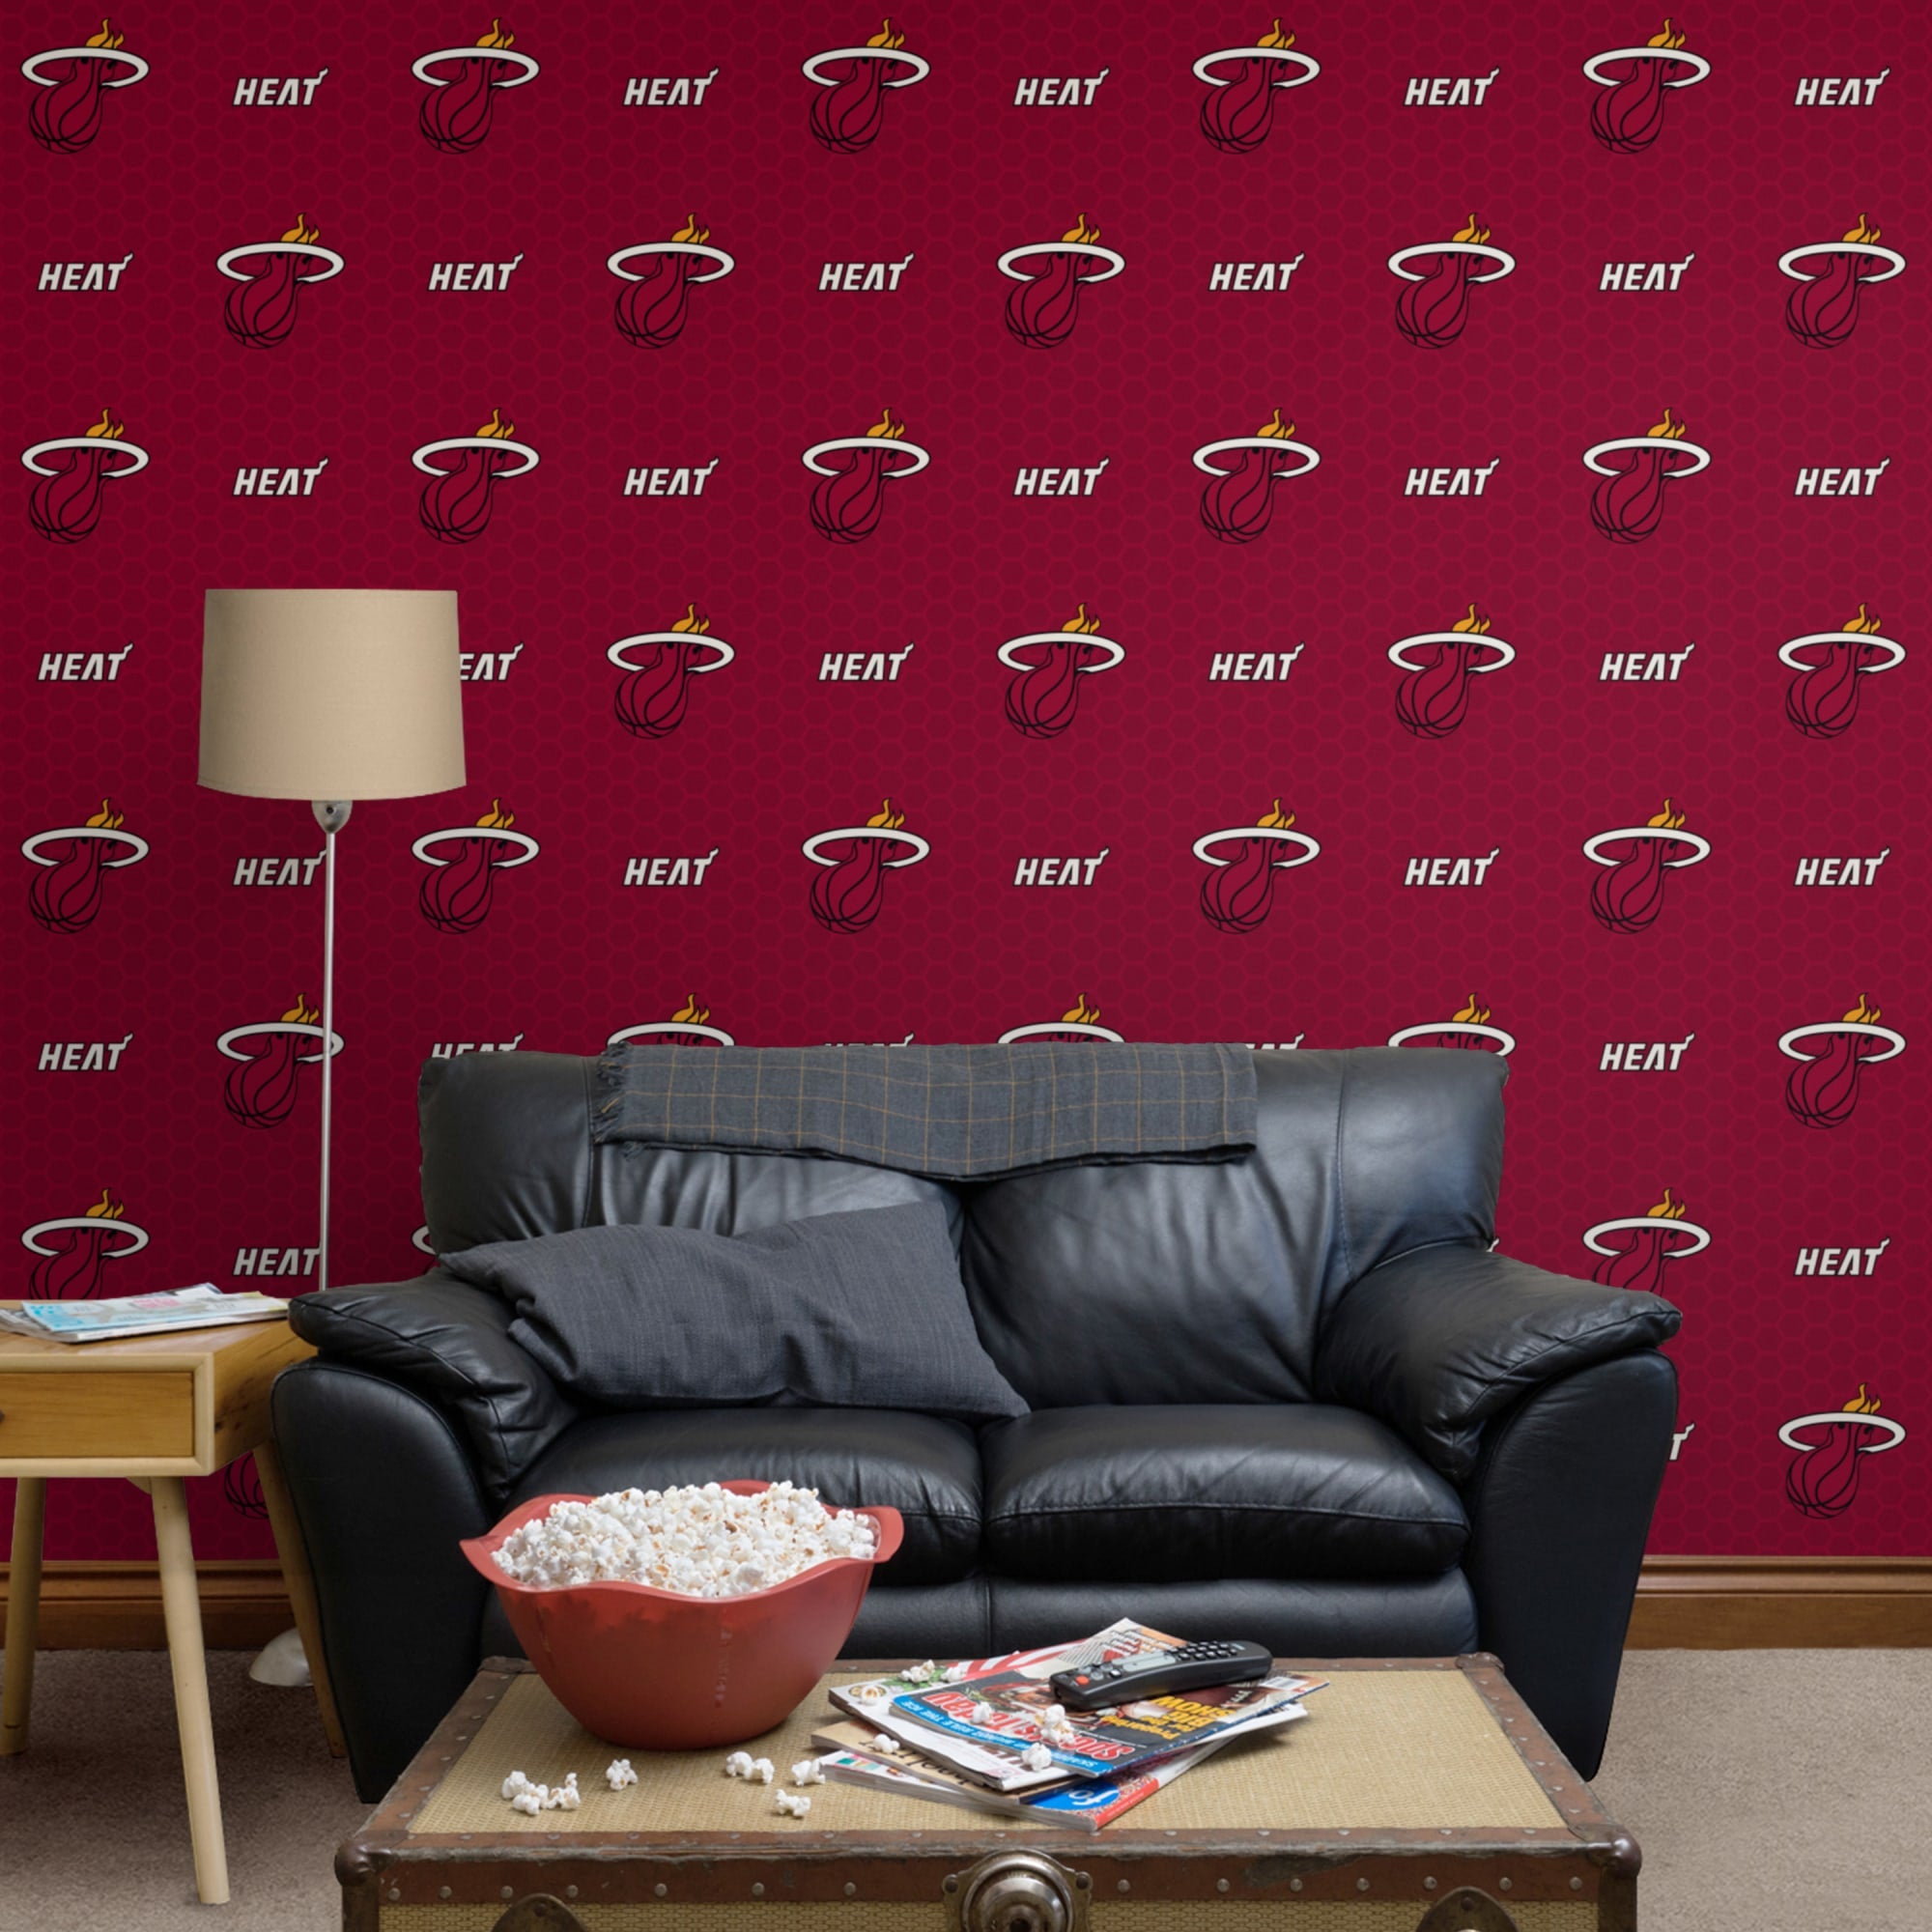 Miami Heat: Logo Pattern - Officially Licensed Removable Wallpaper 12" x 12" Sample by Fathead